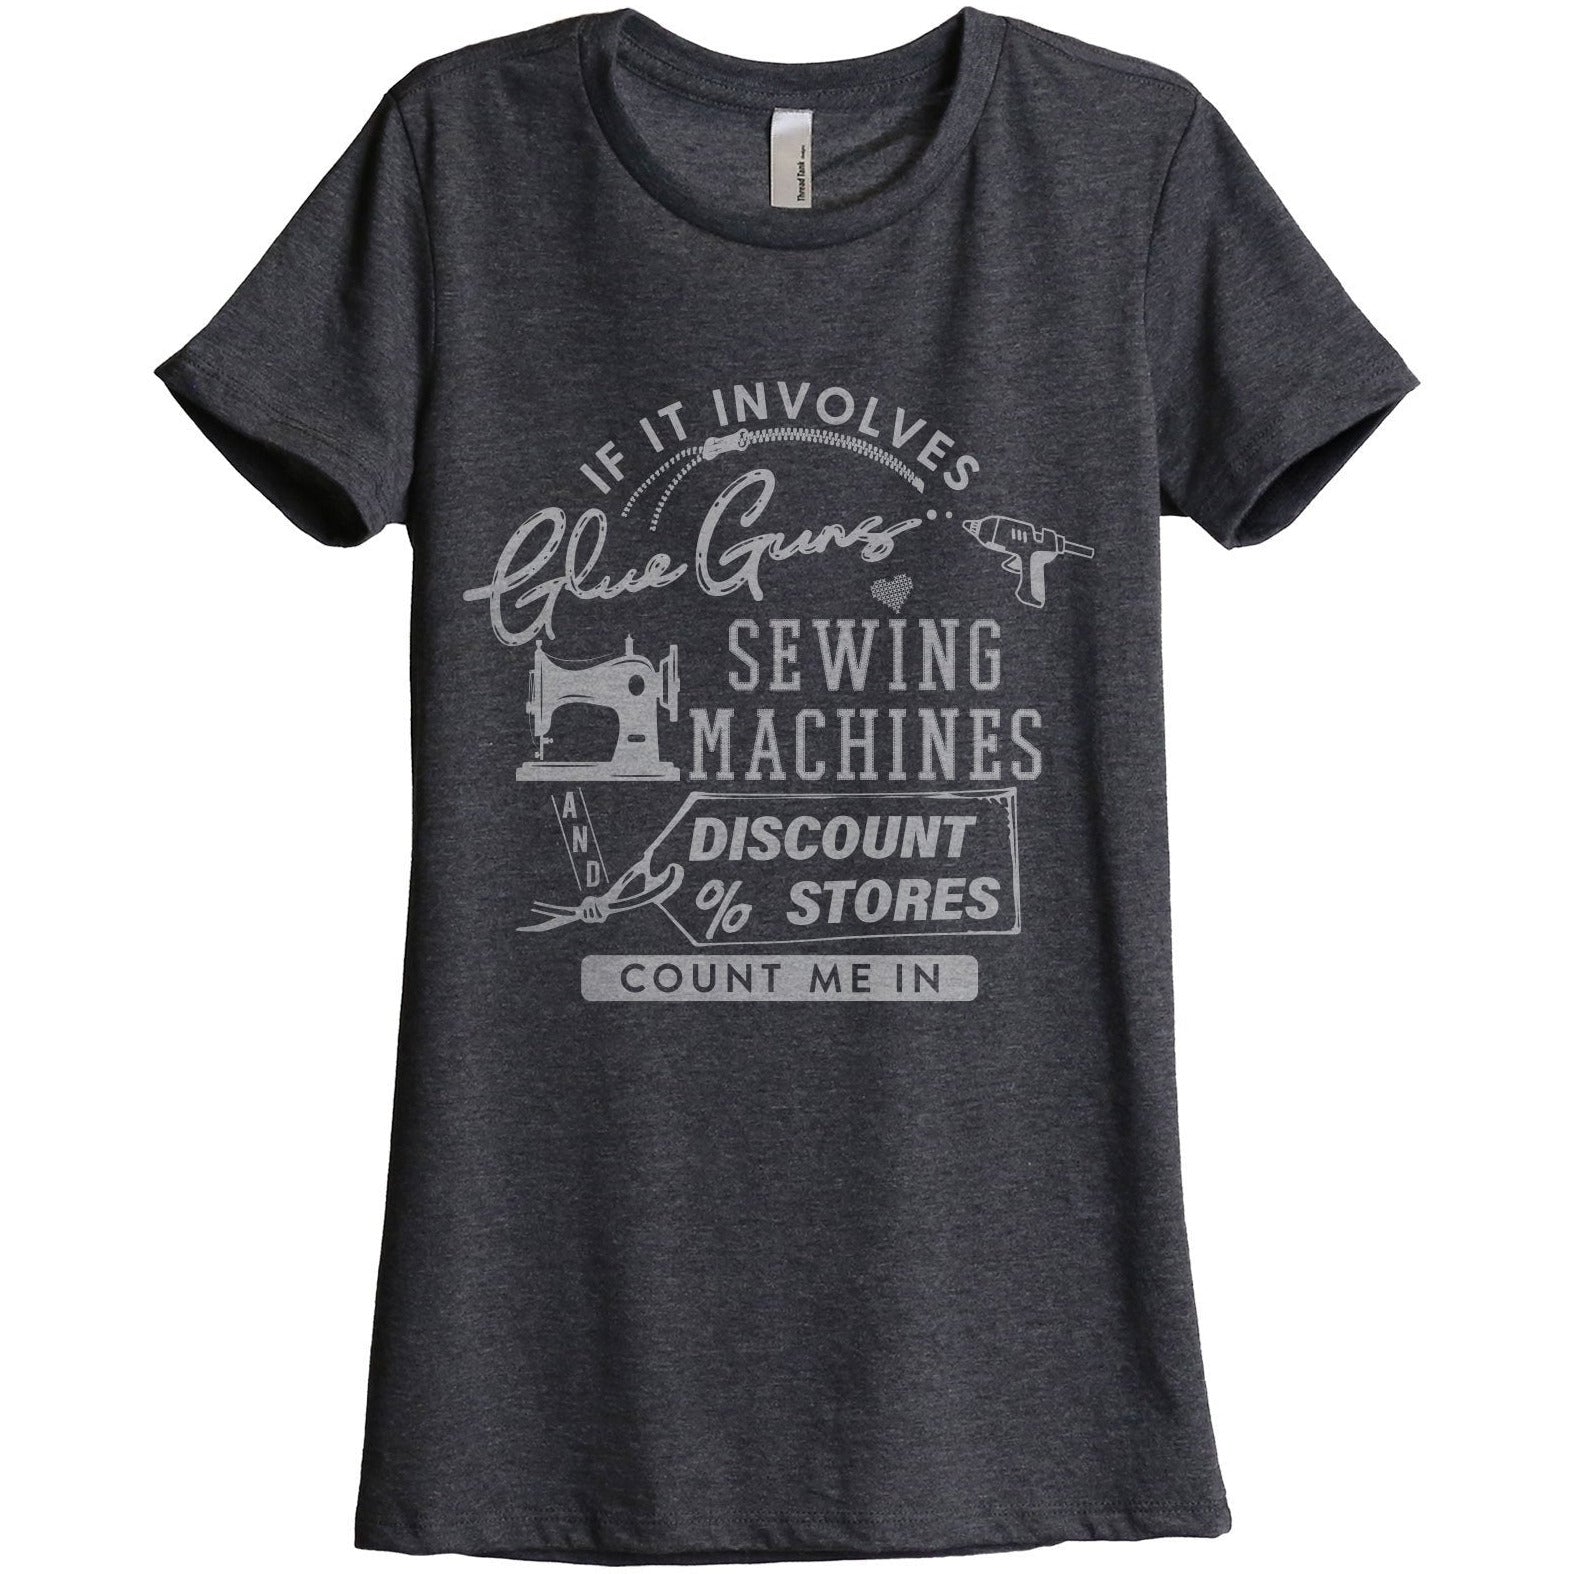 Glue Guns Sewing Machines And Discount Stores Women's Relaxed Crewneck T-Shirt Top Tee Charcoal Grey
